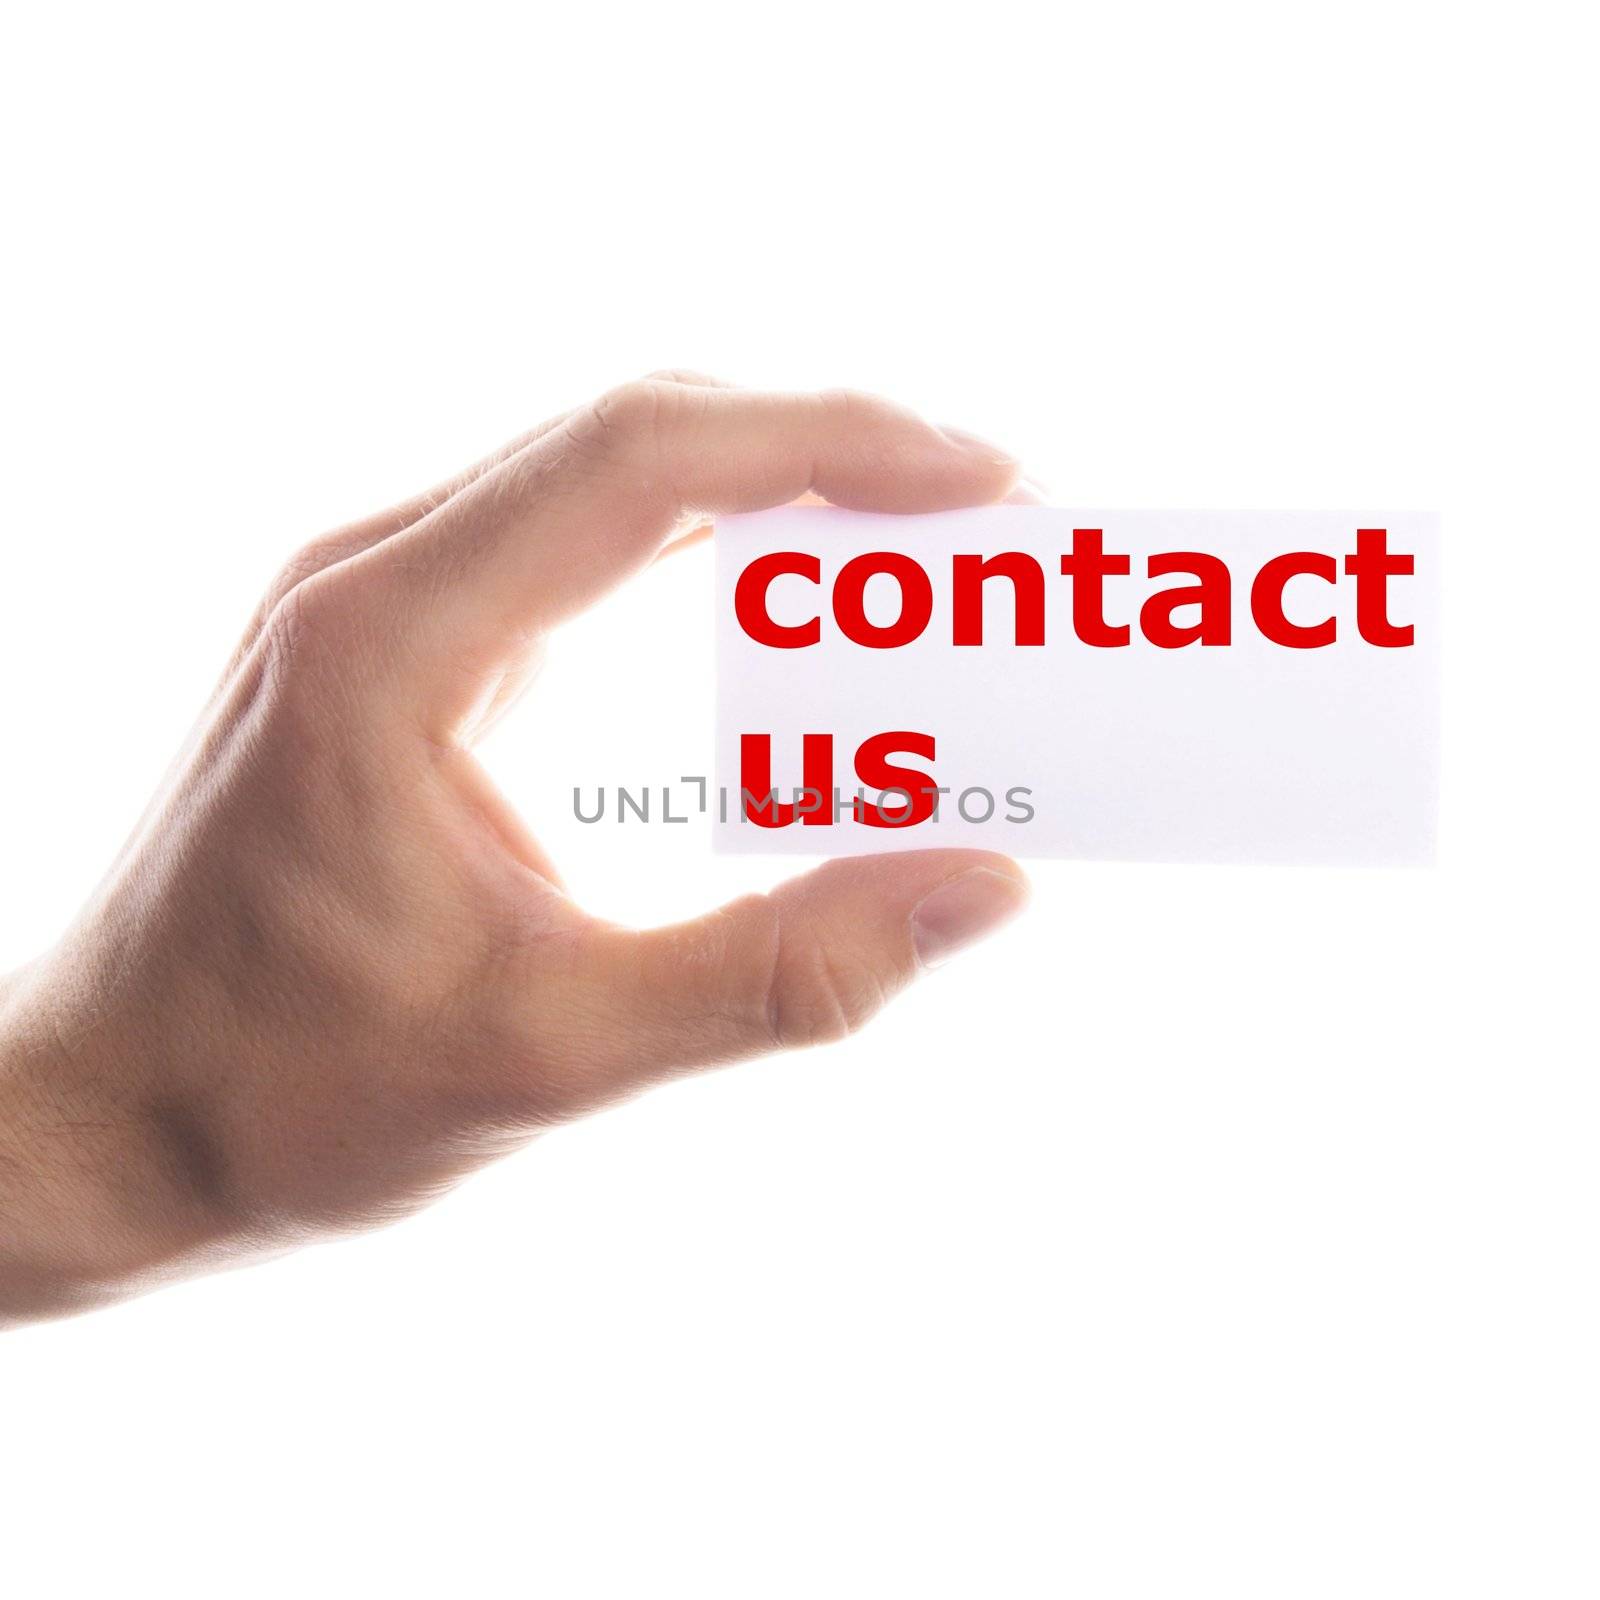 contact us or service concept with hand holding paper